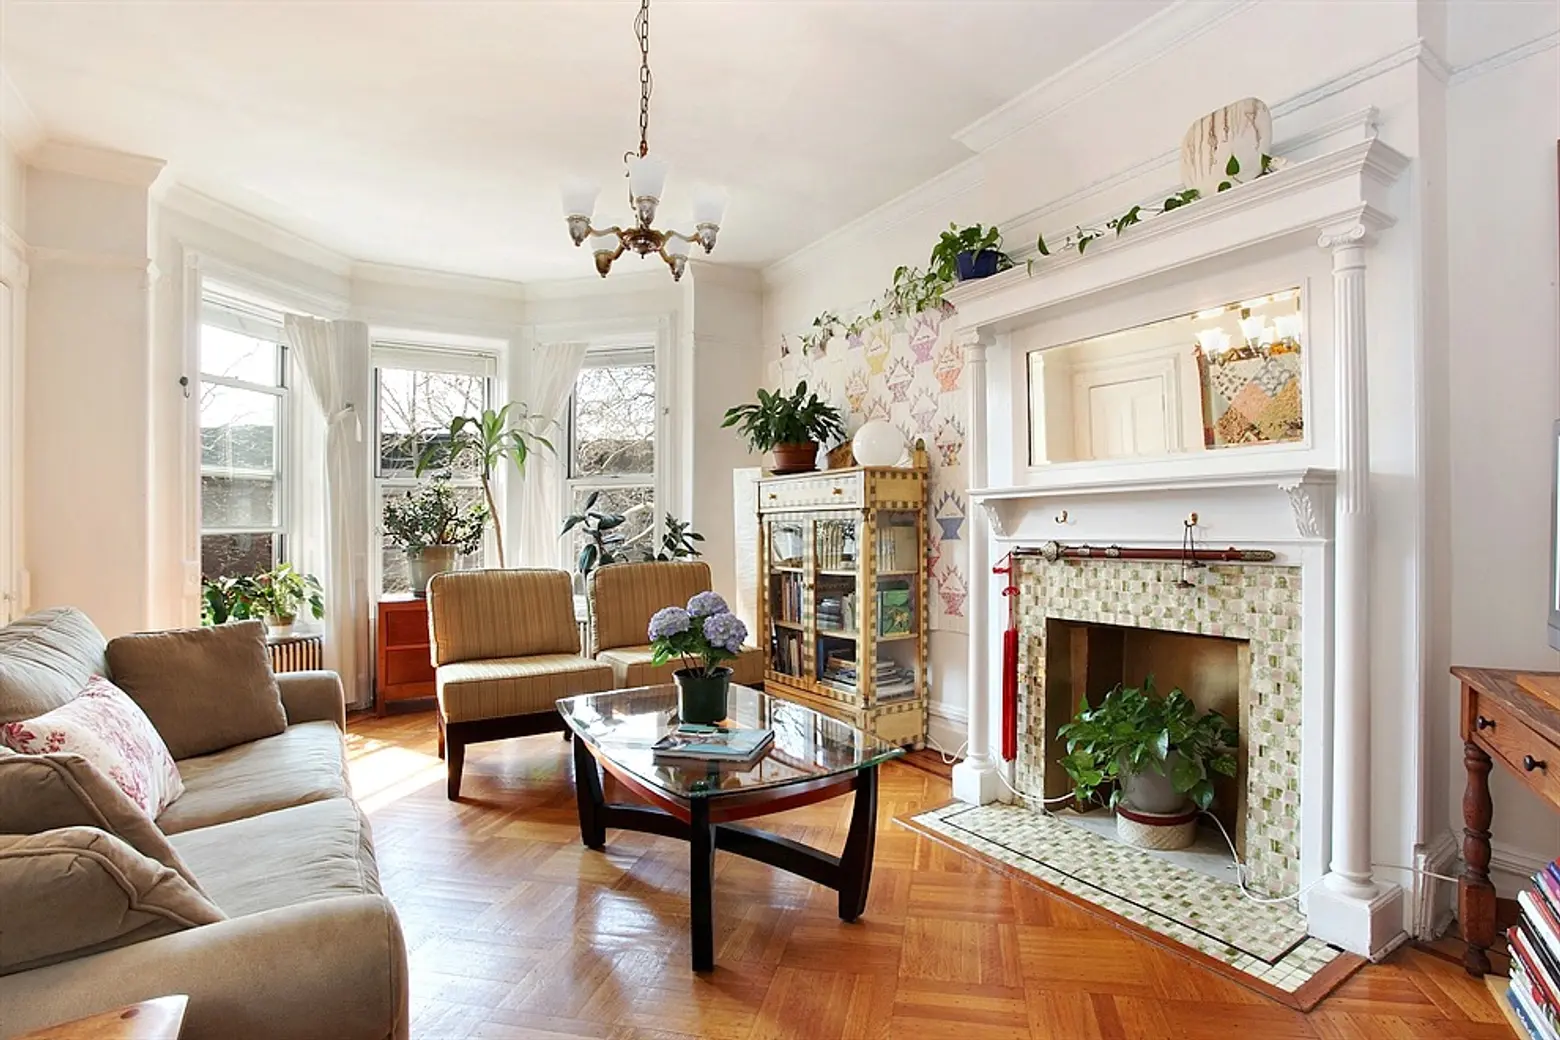 Home Temporary Home: Picturesque Park Slope Rental Makes Perfect Short-Term Retreat